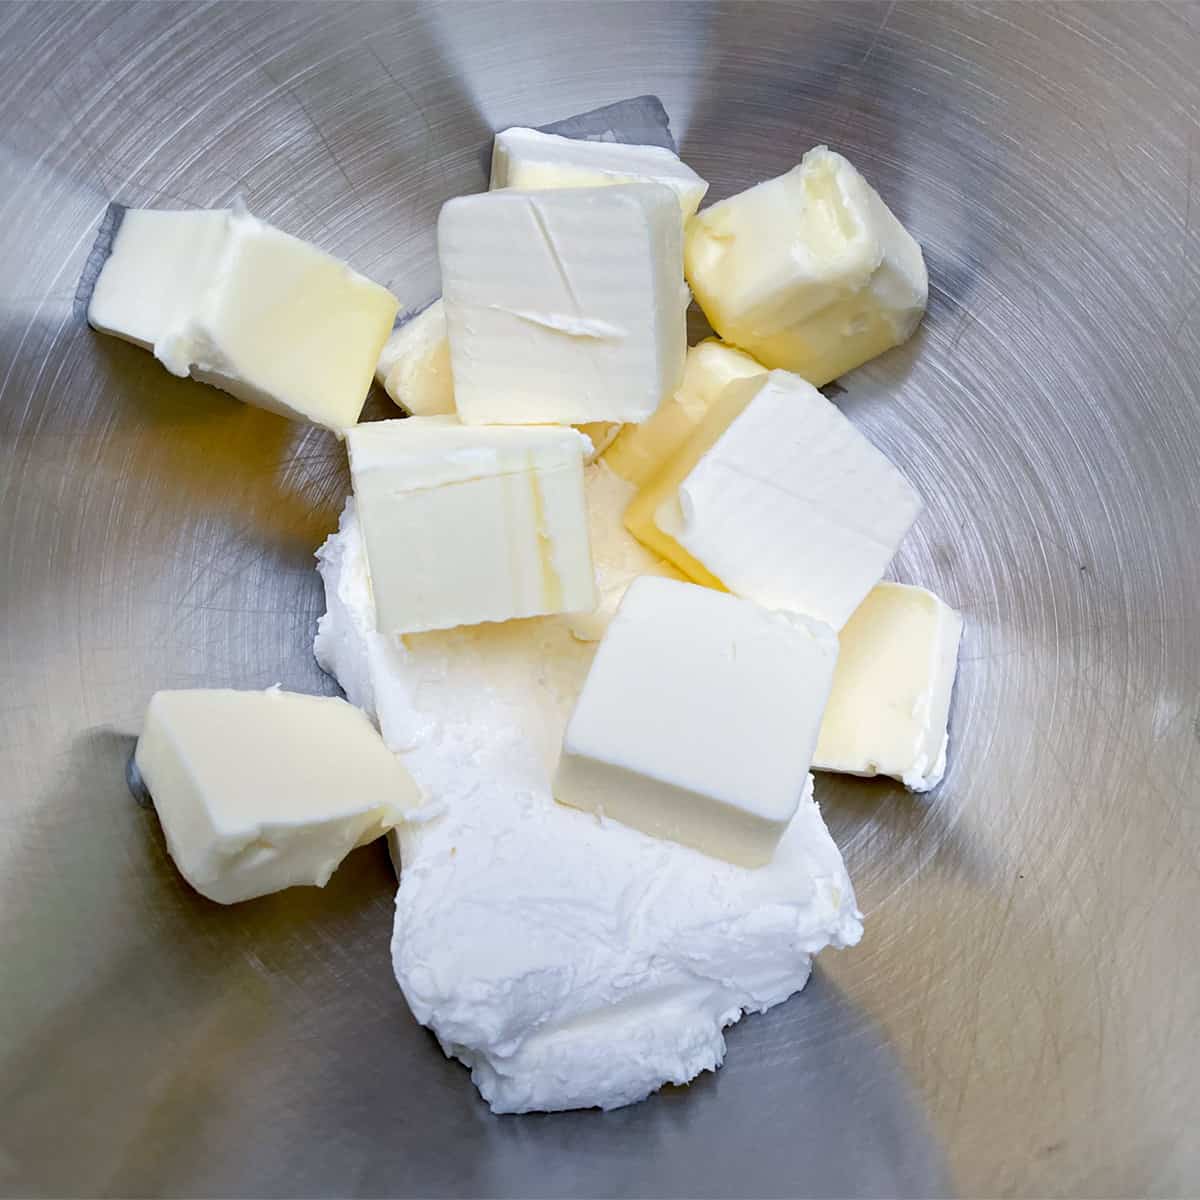 Cream cheese and butter cubes in the mixer bowl.